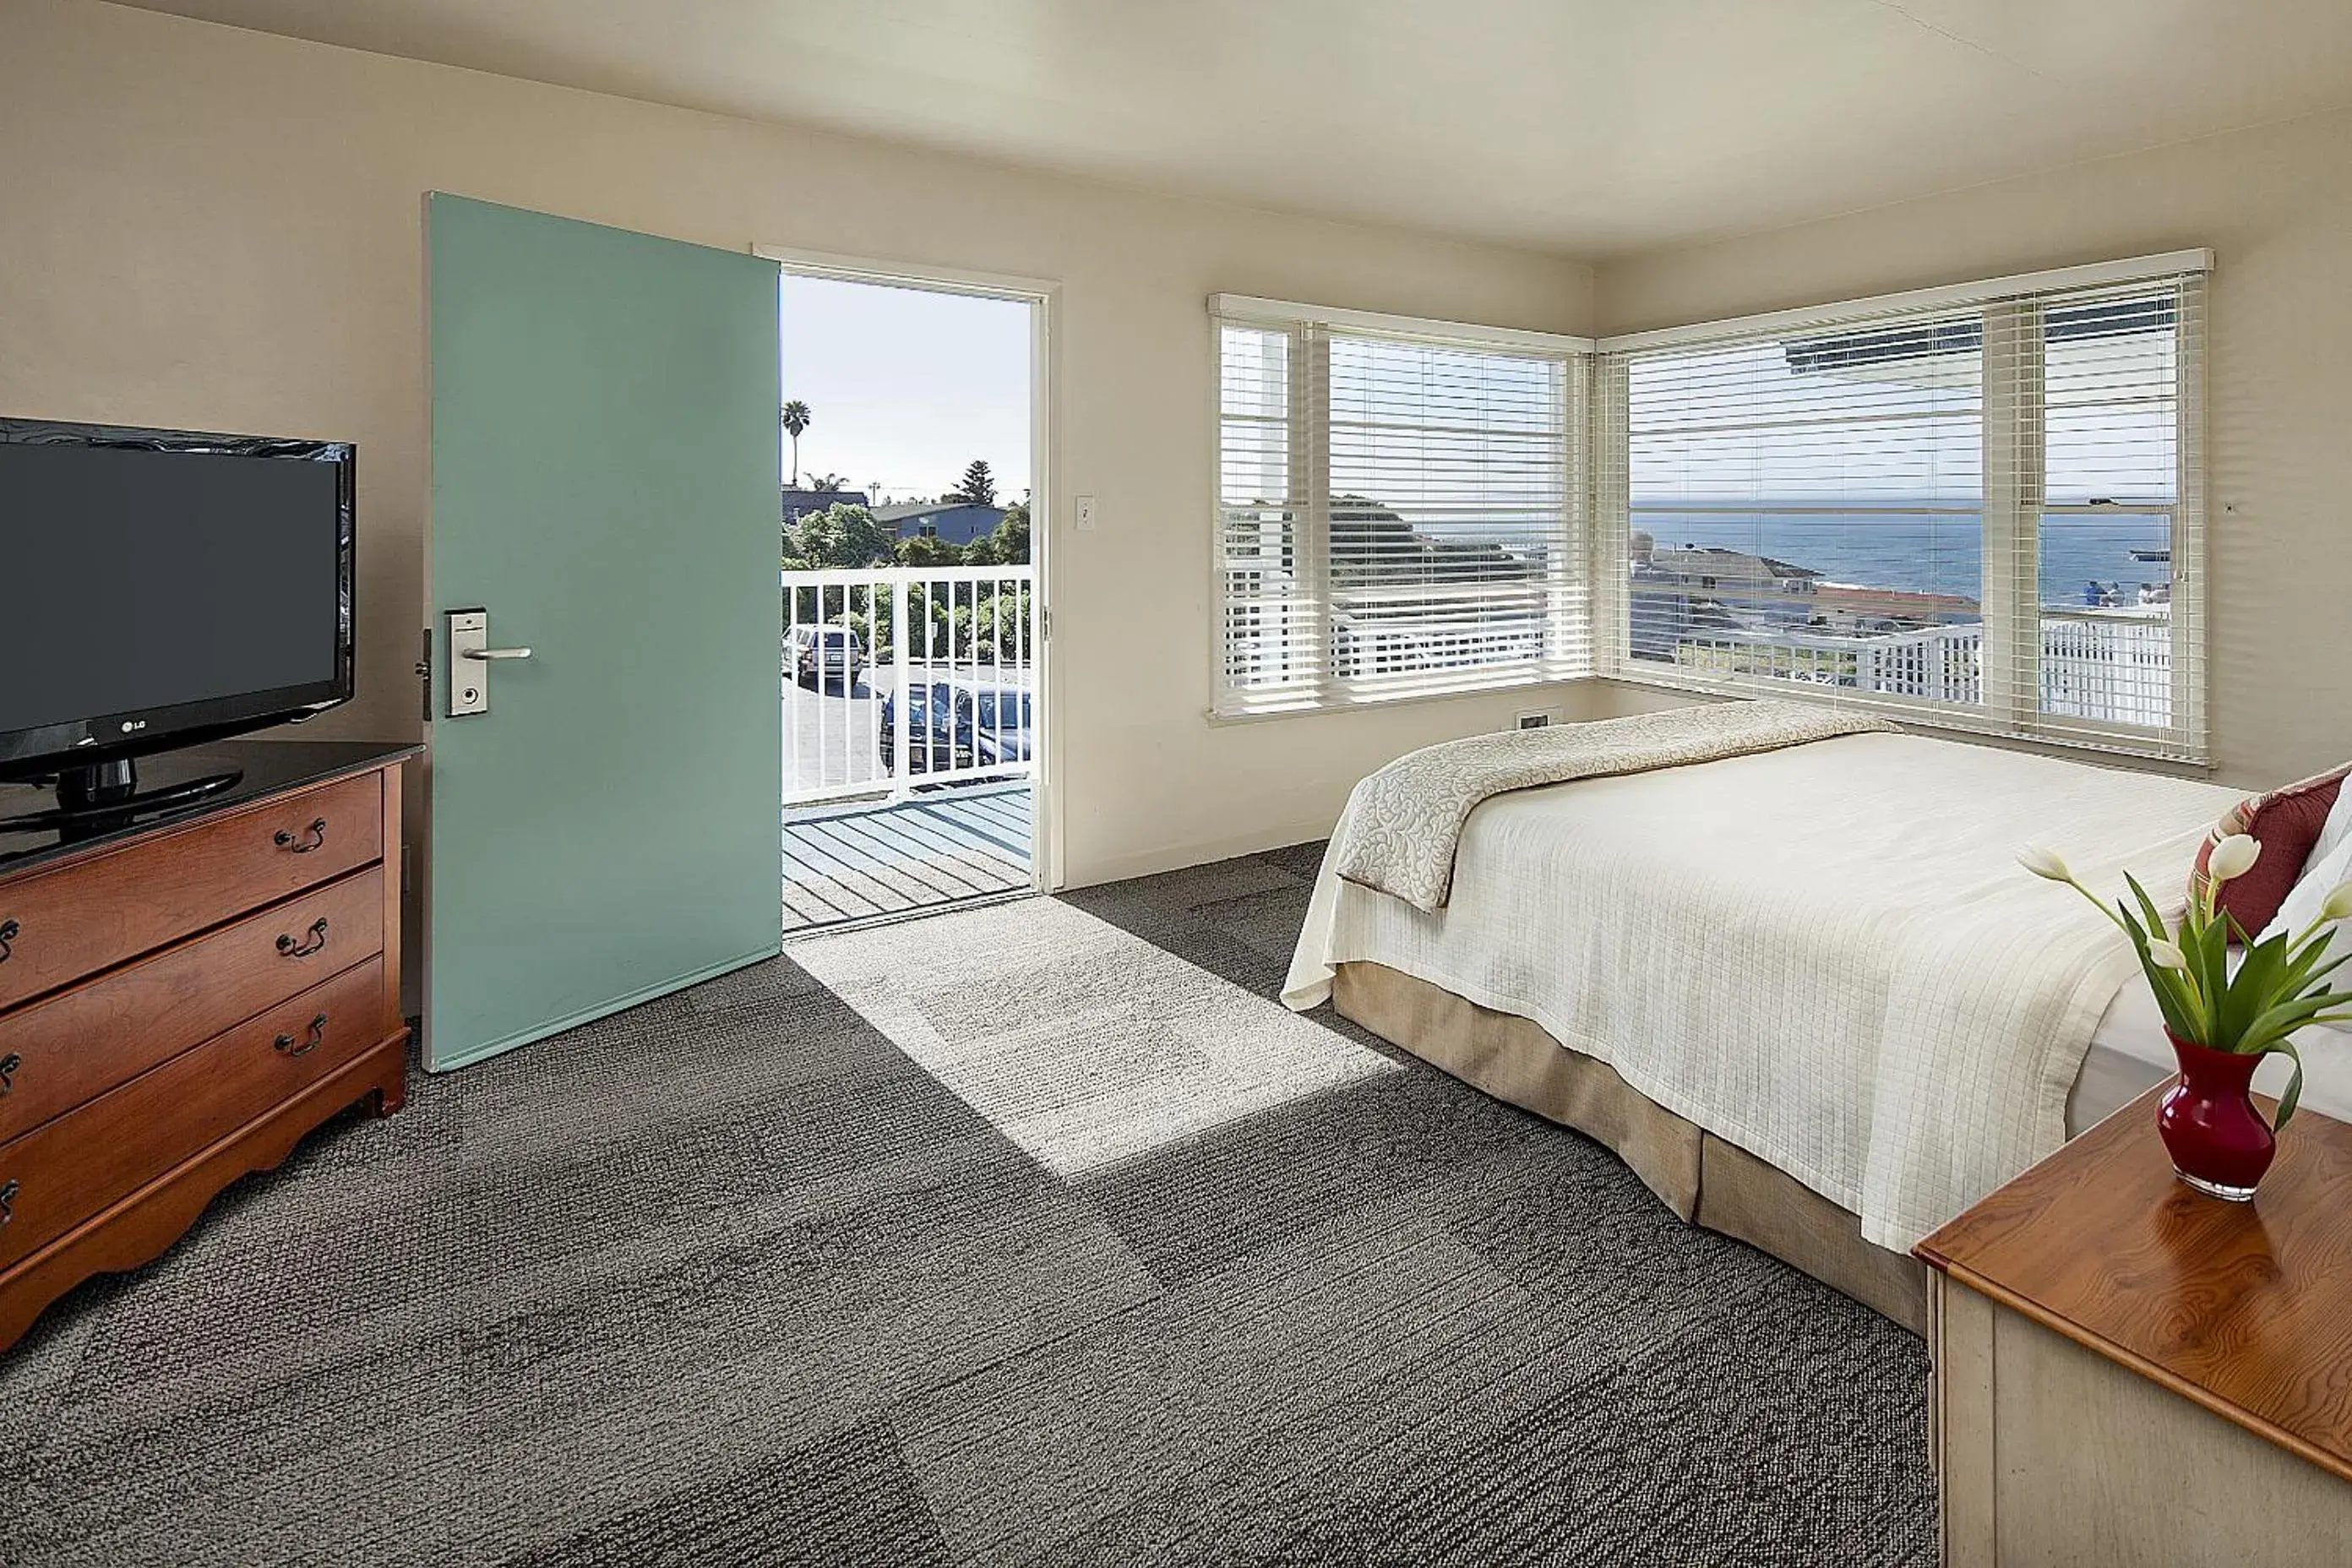 King Room with Ocean View in Tides Oceanview Inn and Cottages